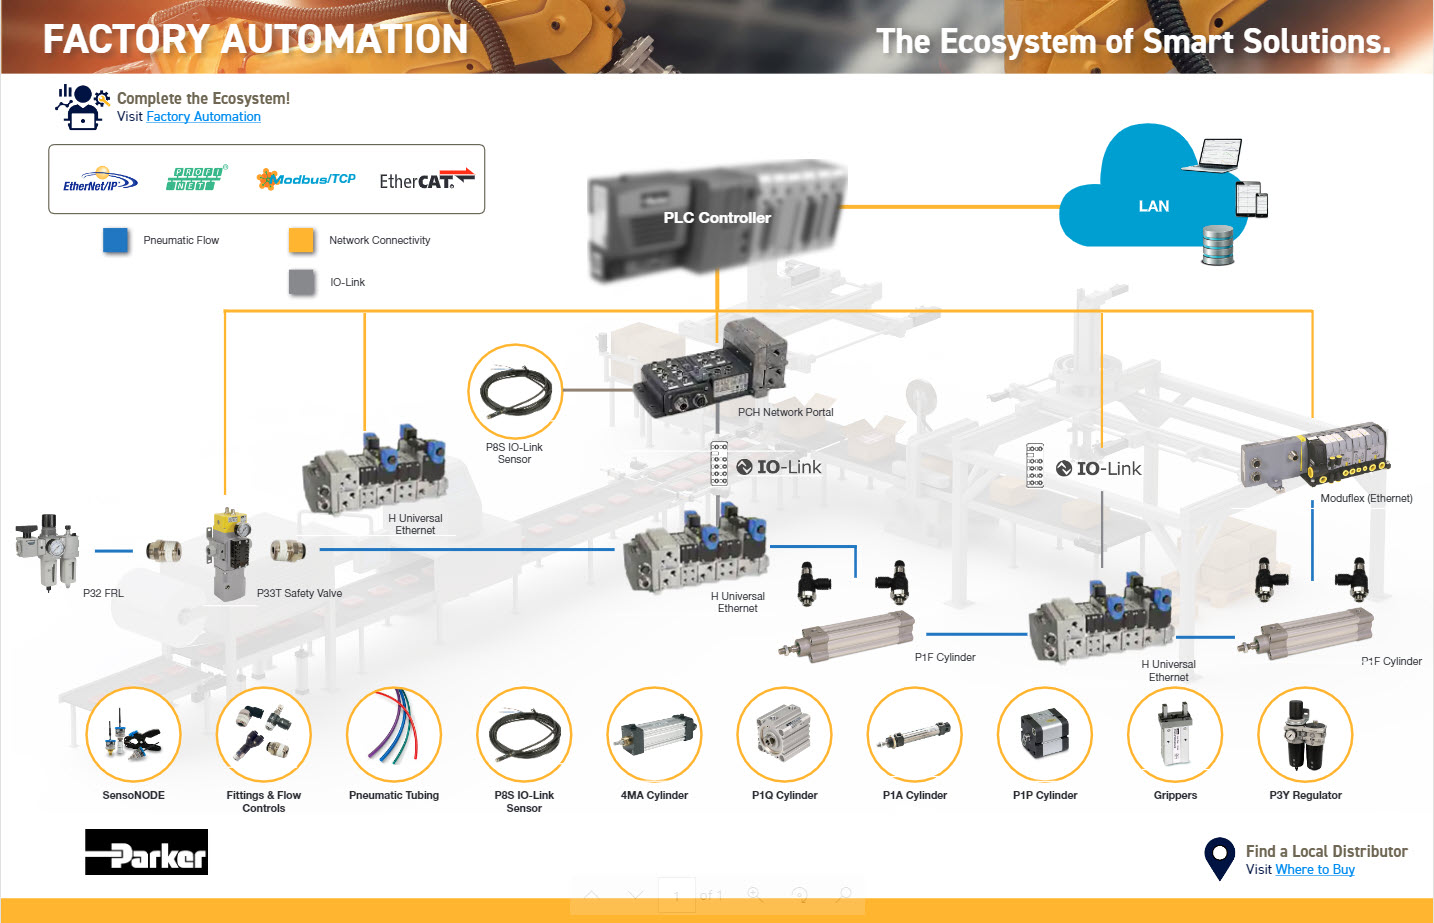 Explore the factory automation ecosystem